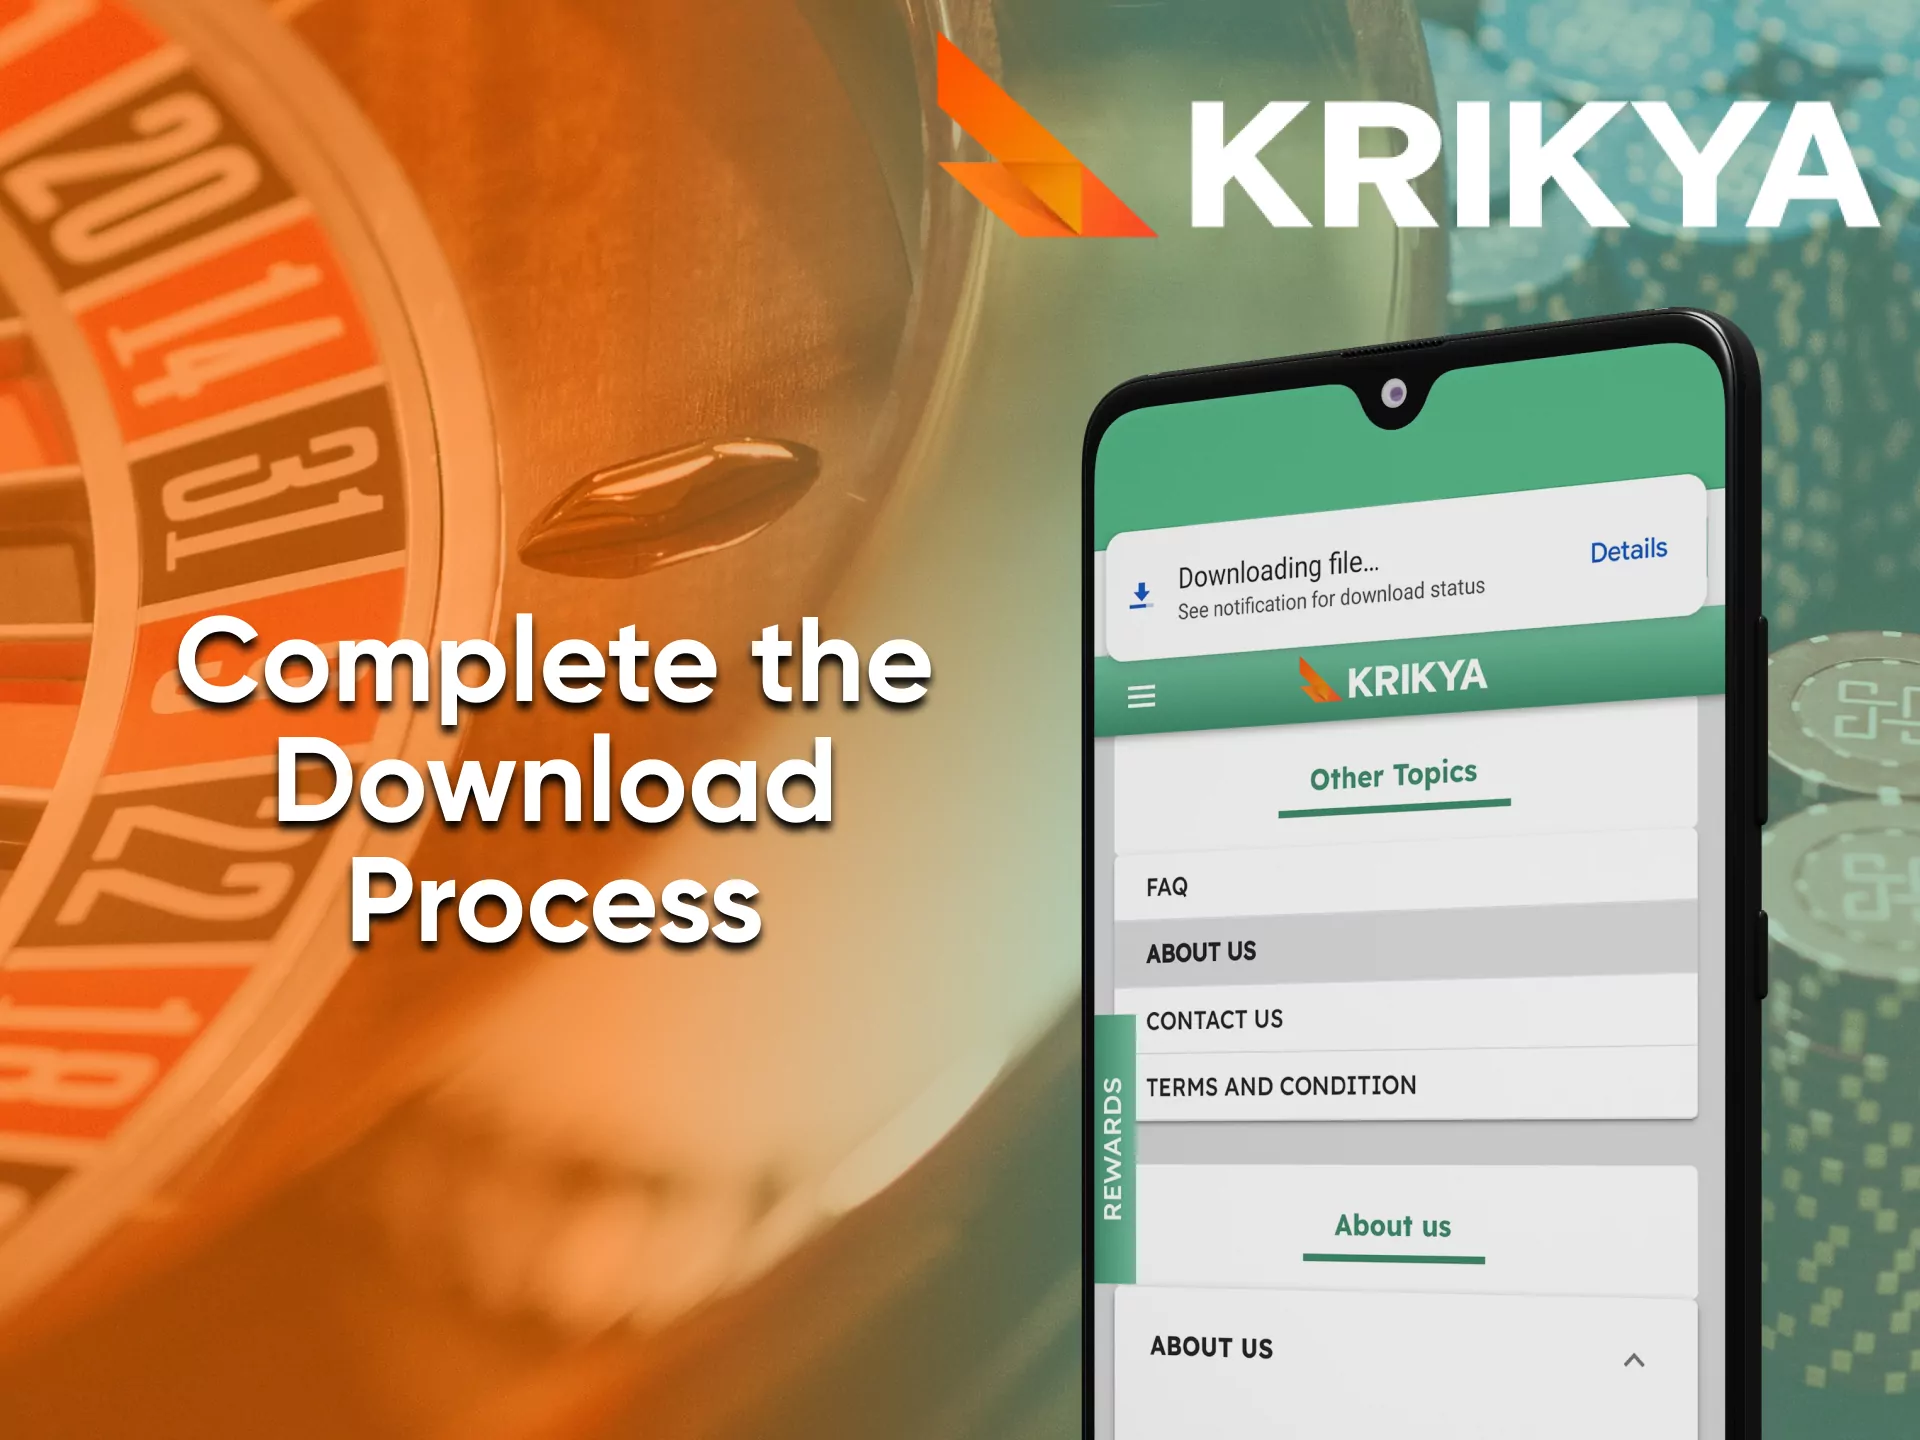 Complete the process of downloading the Krikya application for further installation.